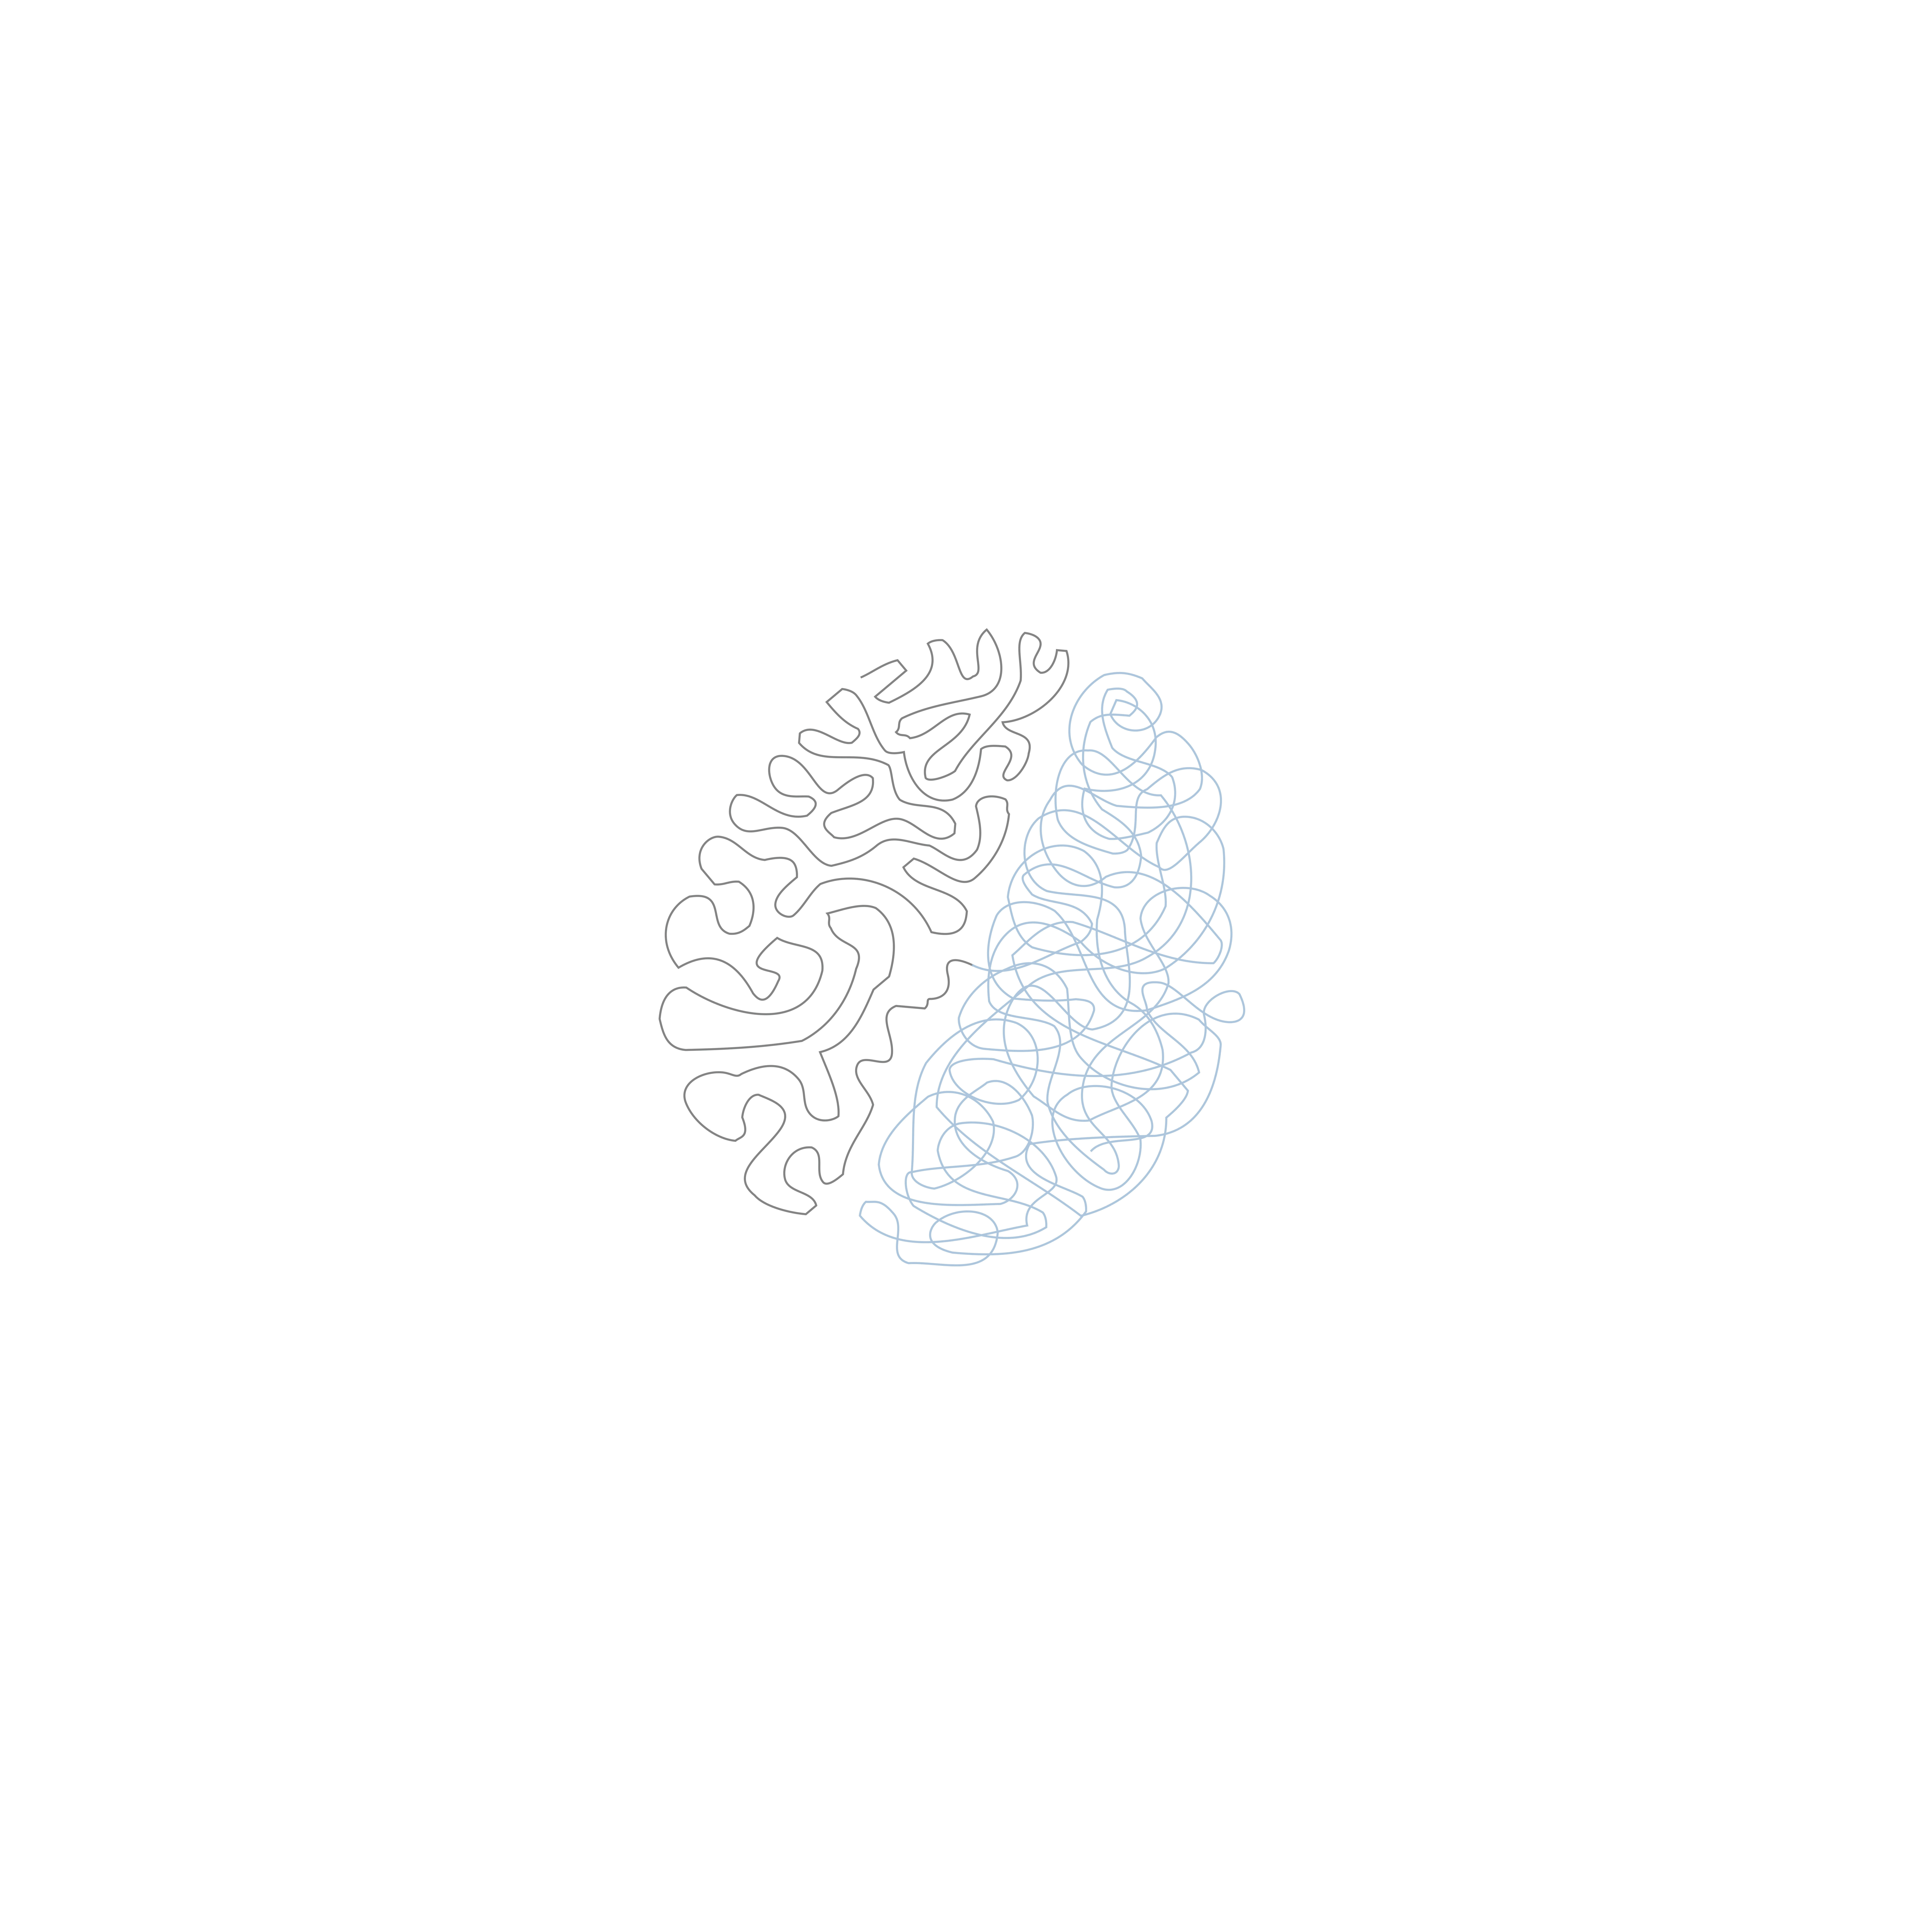 Simple line drawing of a brain